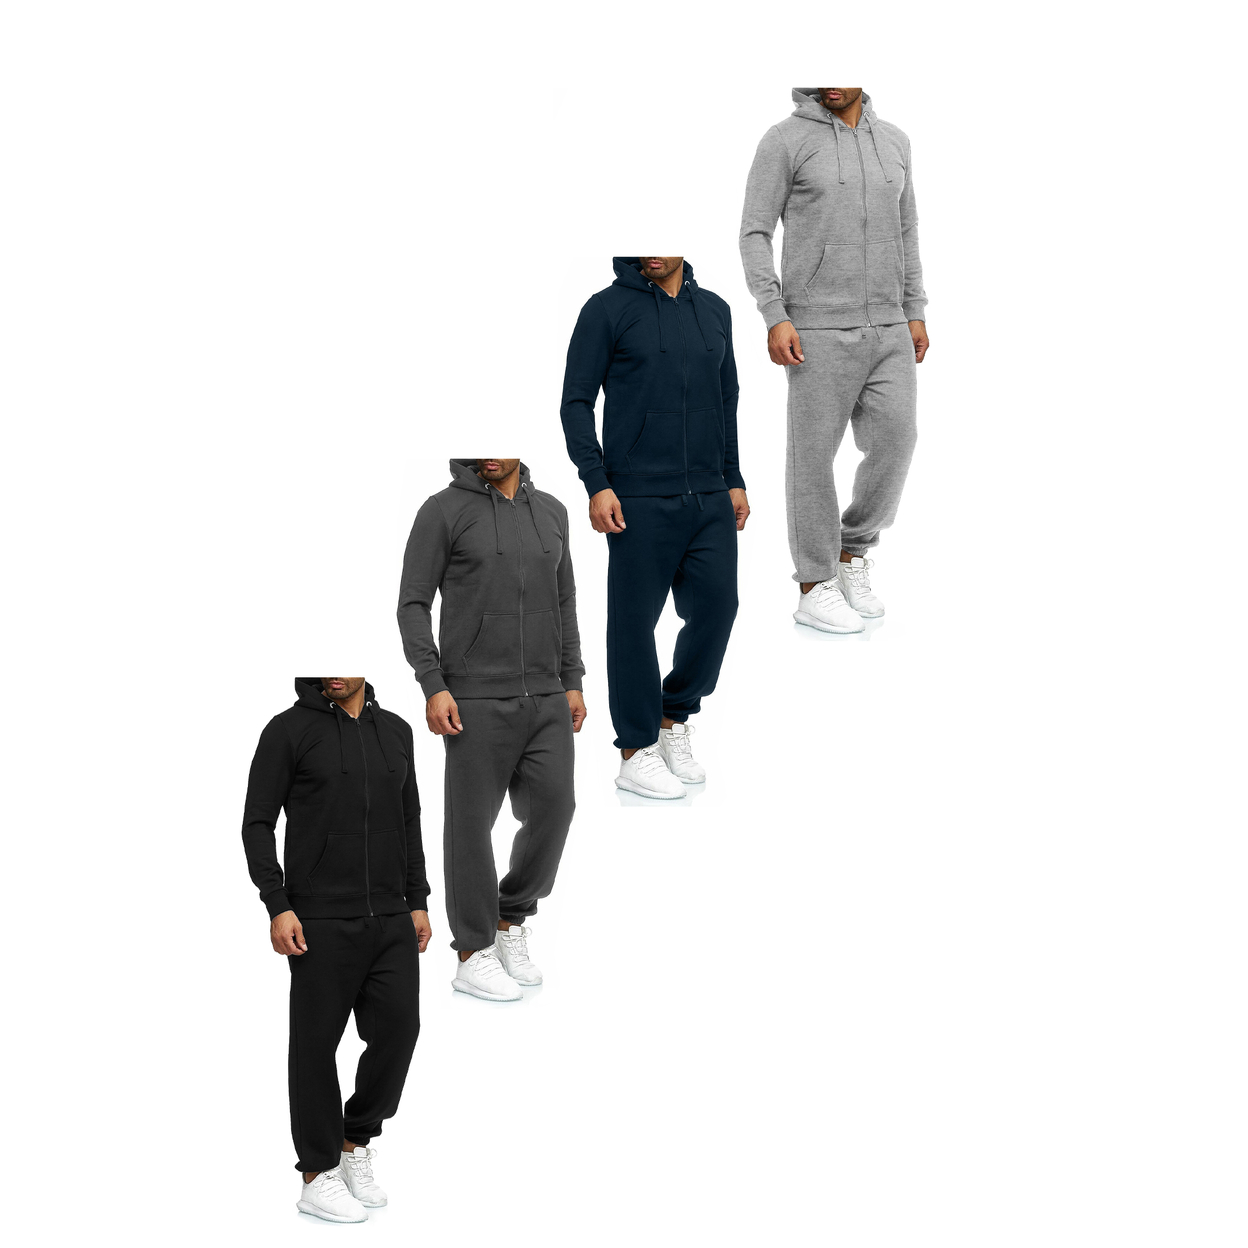 Multi-Pack: Men's Casual Big & Tall Athletic Active Winter Warm Fleece Lined Full Zip Tracksuit Jogger Set - Grey, 2-pack, X-large